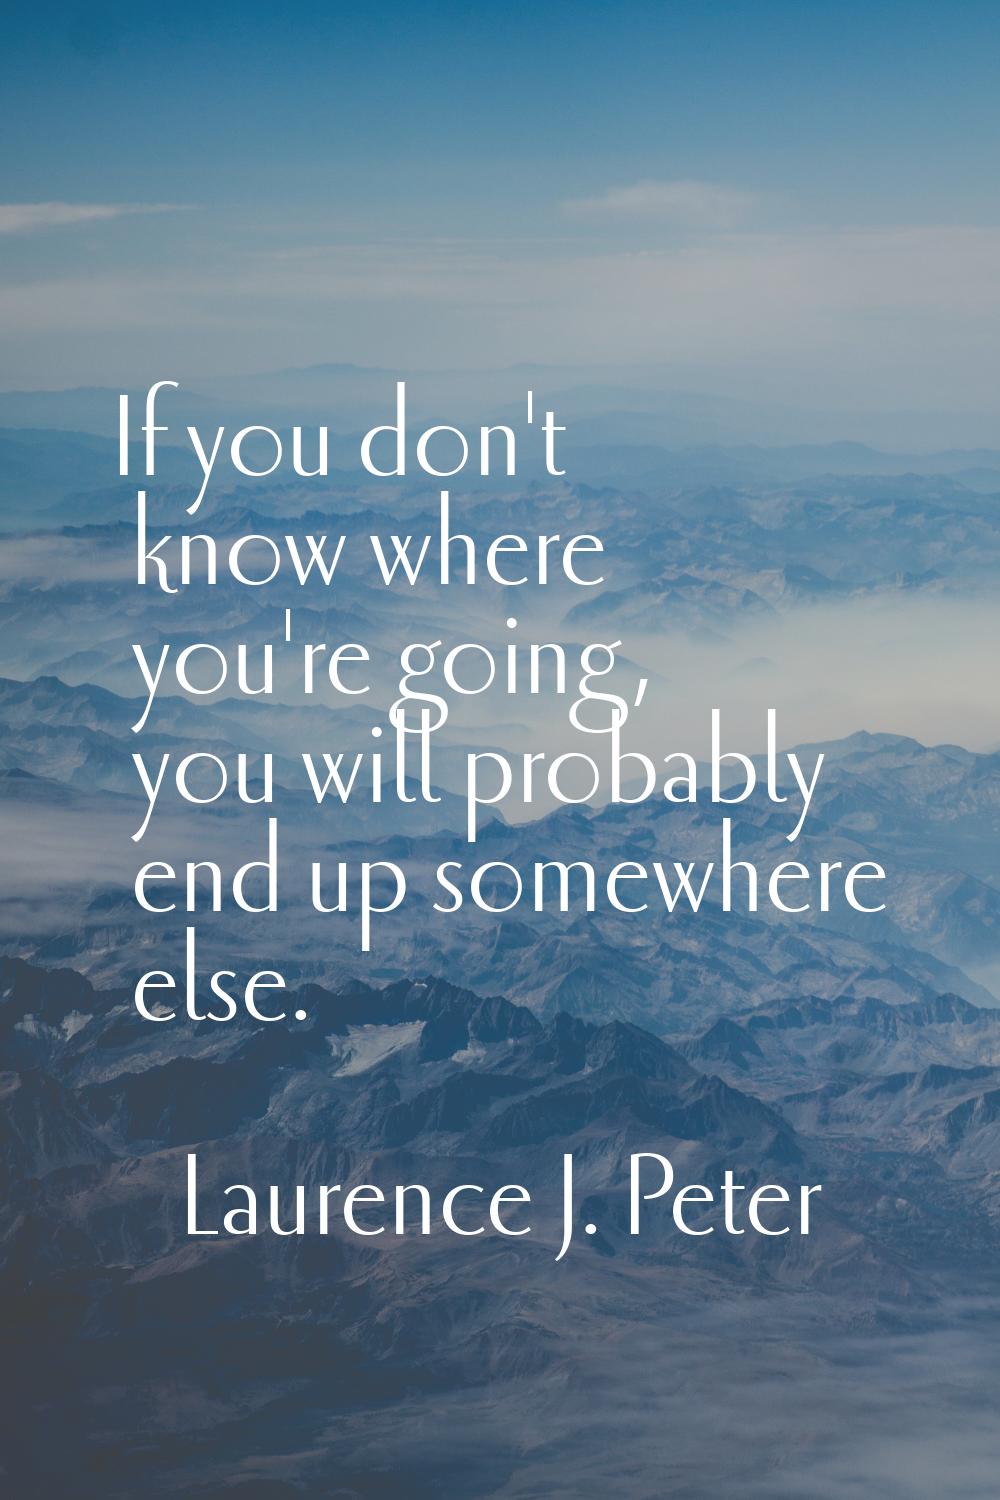 If you don't know where you're going, you will probably end up somewhere else.